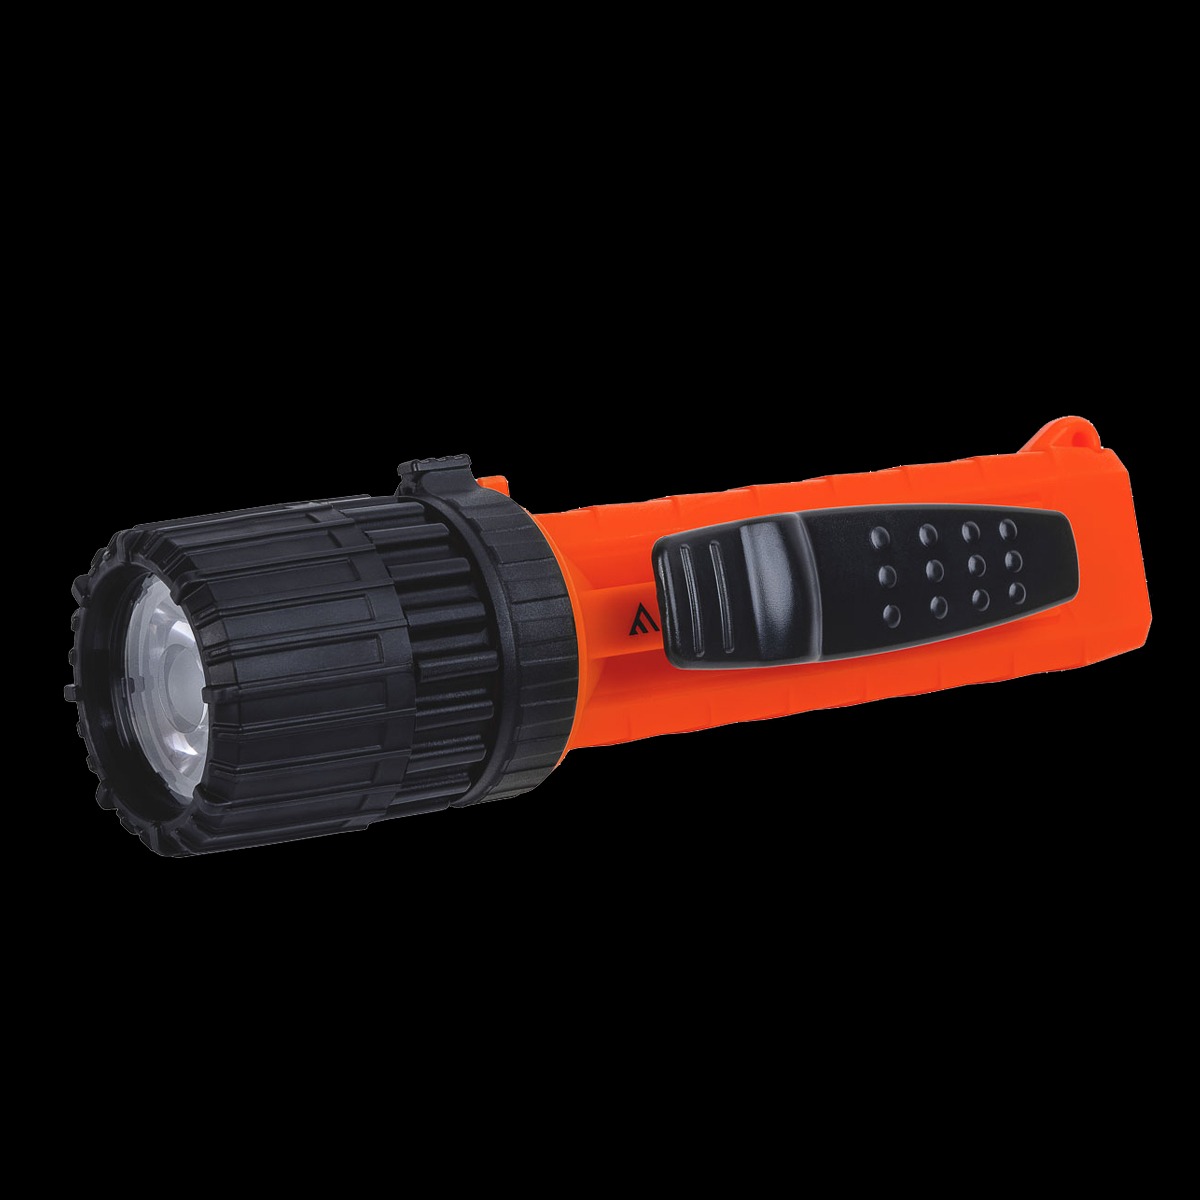 Ex-ATEX certified rechargeable handheld flashlight, 235 lm, M-Fire Focus RC